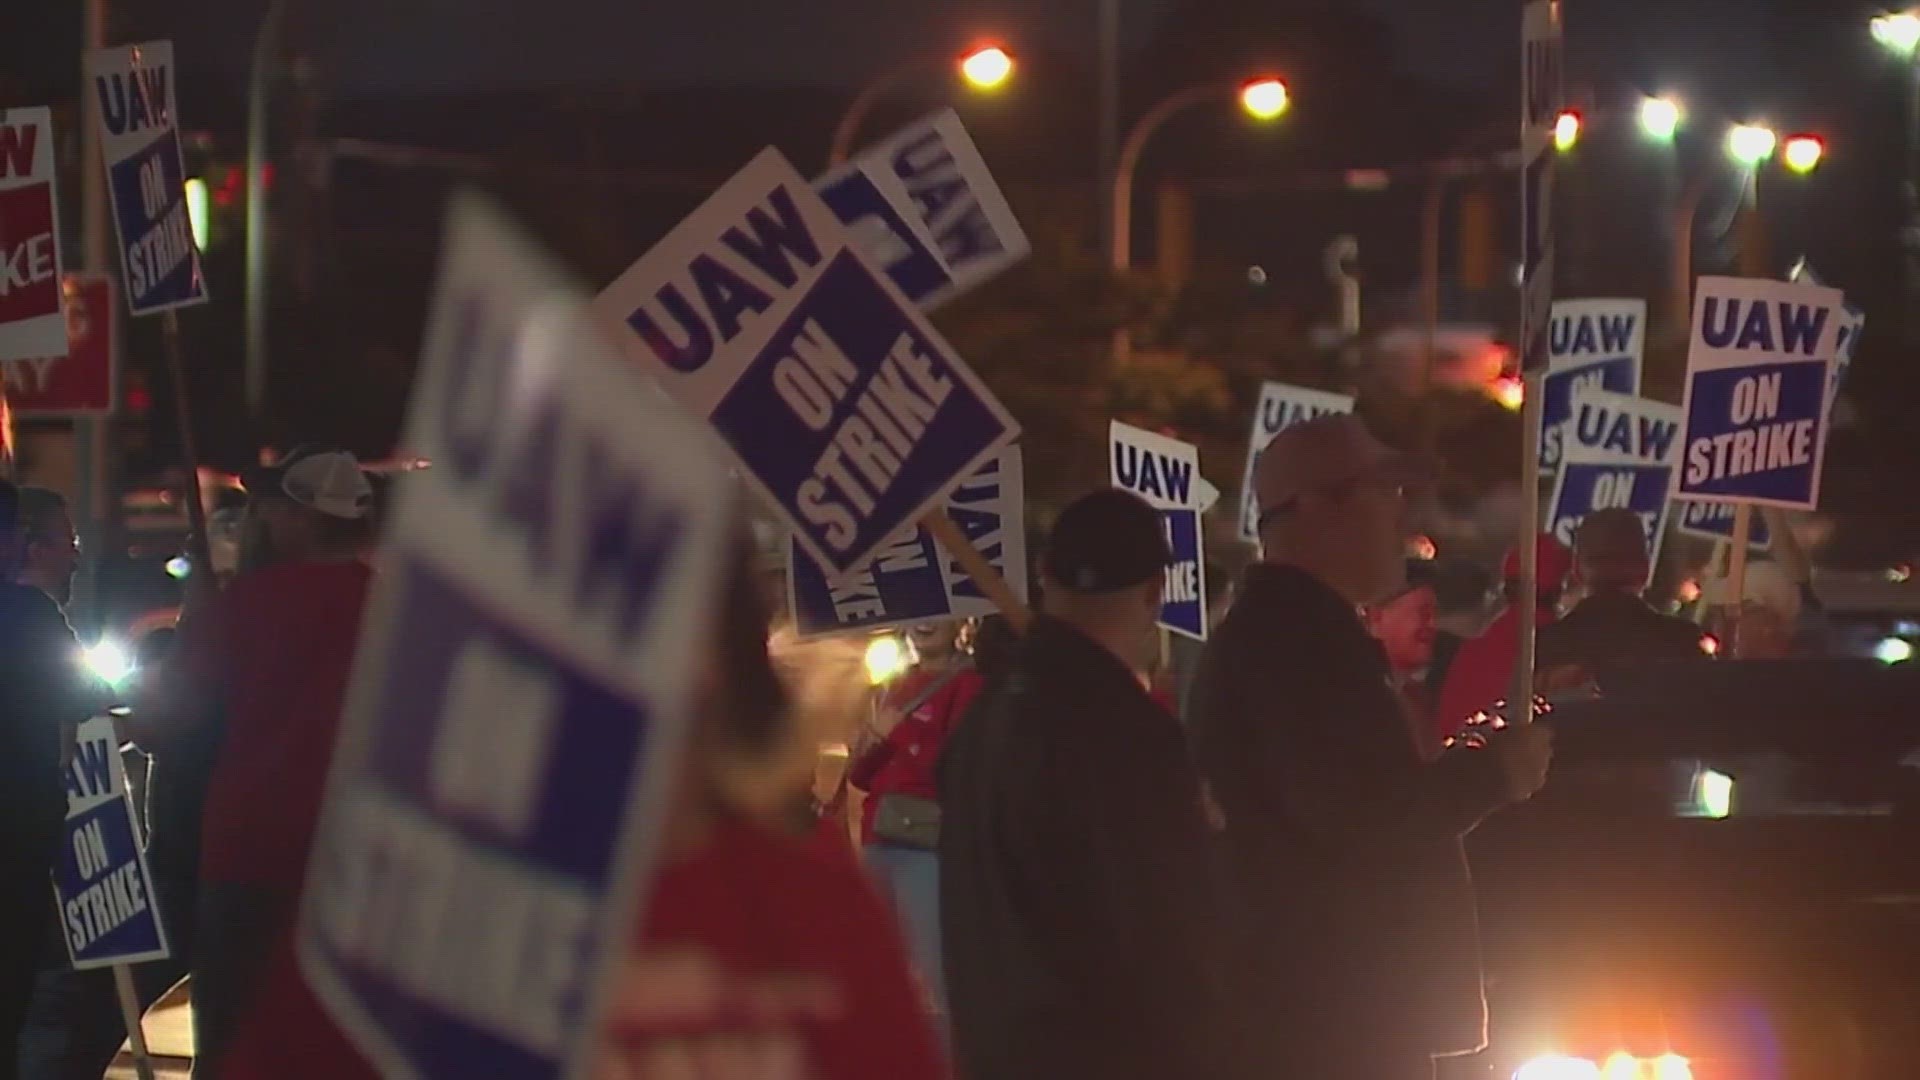 The UAW says their walkouts will expand if workers aren't given a fair contract by noon on Friday.